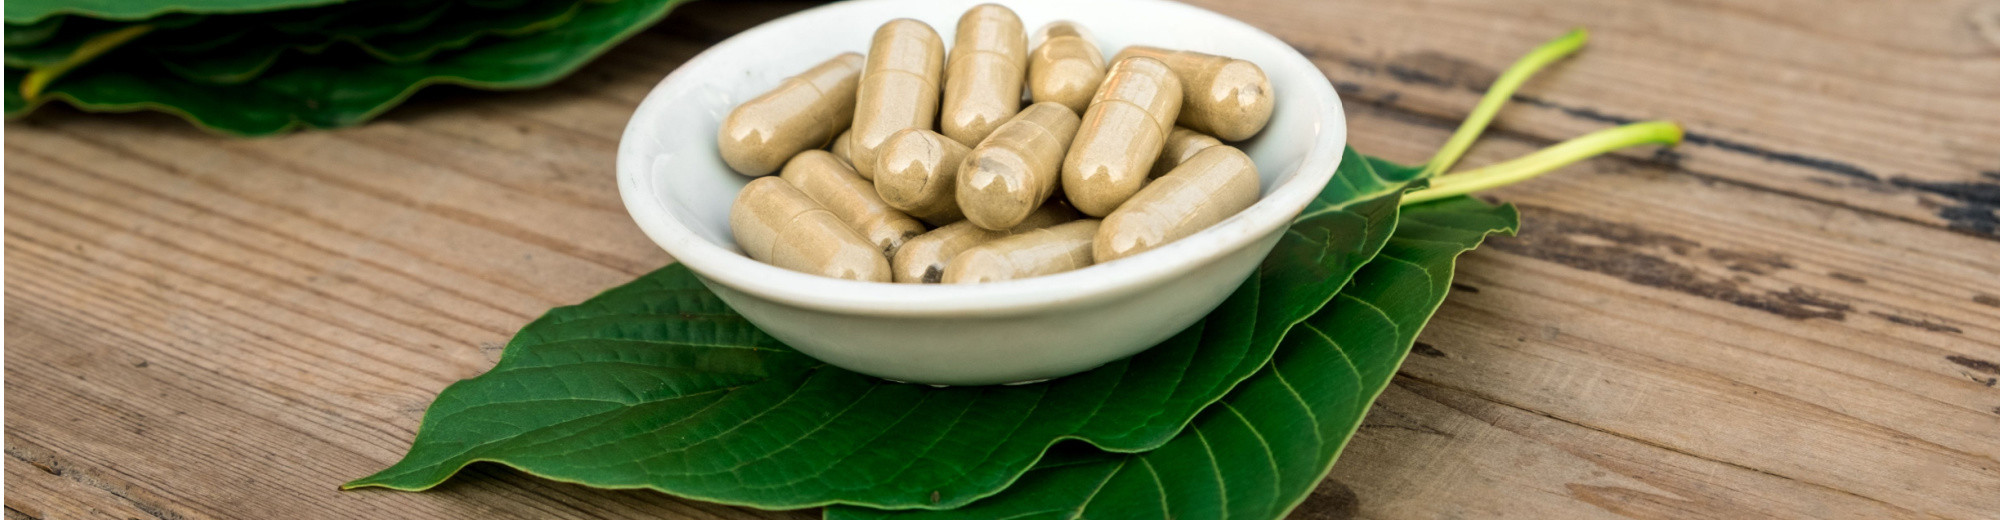 image of effects and characteristics of red borneo and red bali kratom